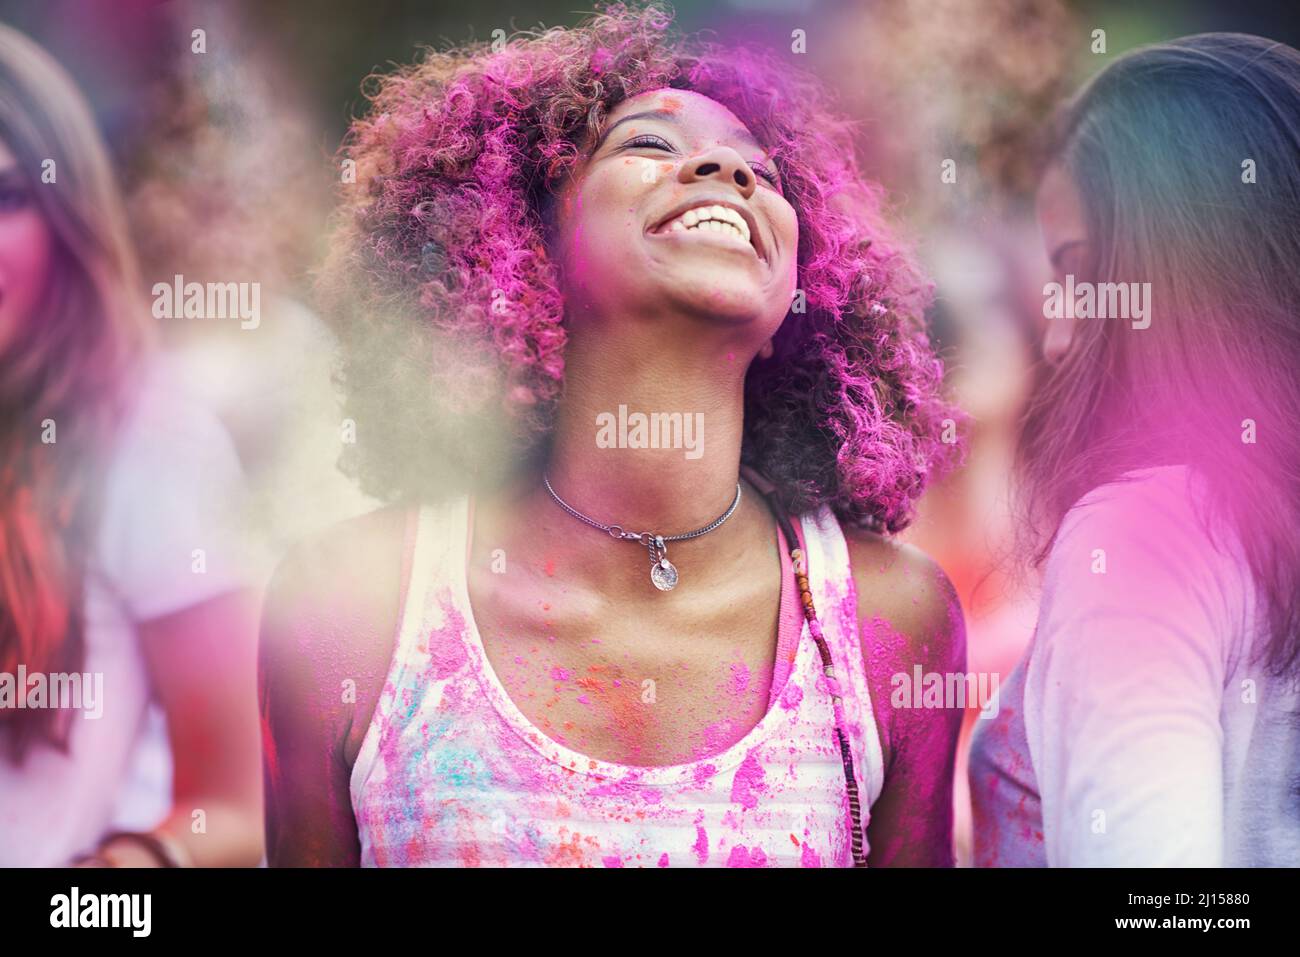 Chasing the rainbow. Shot of happy friends having fun with powder paint. Stock Photo